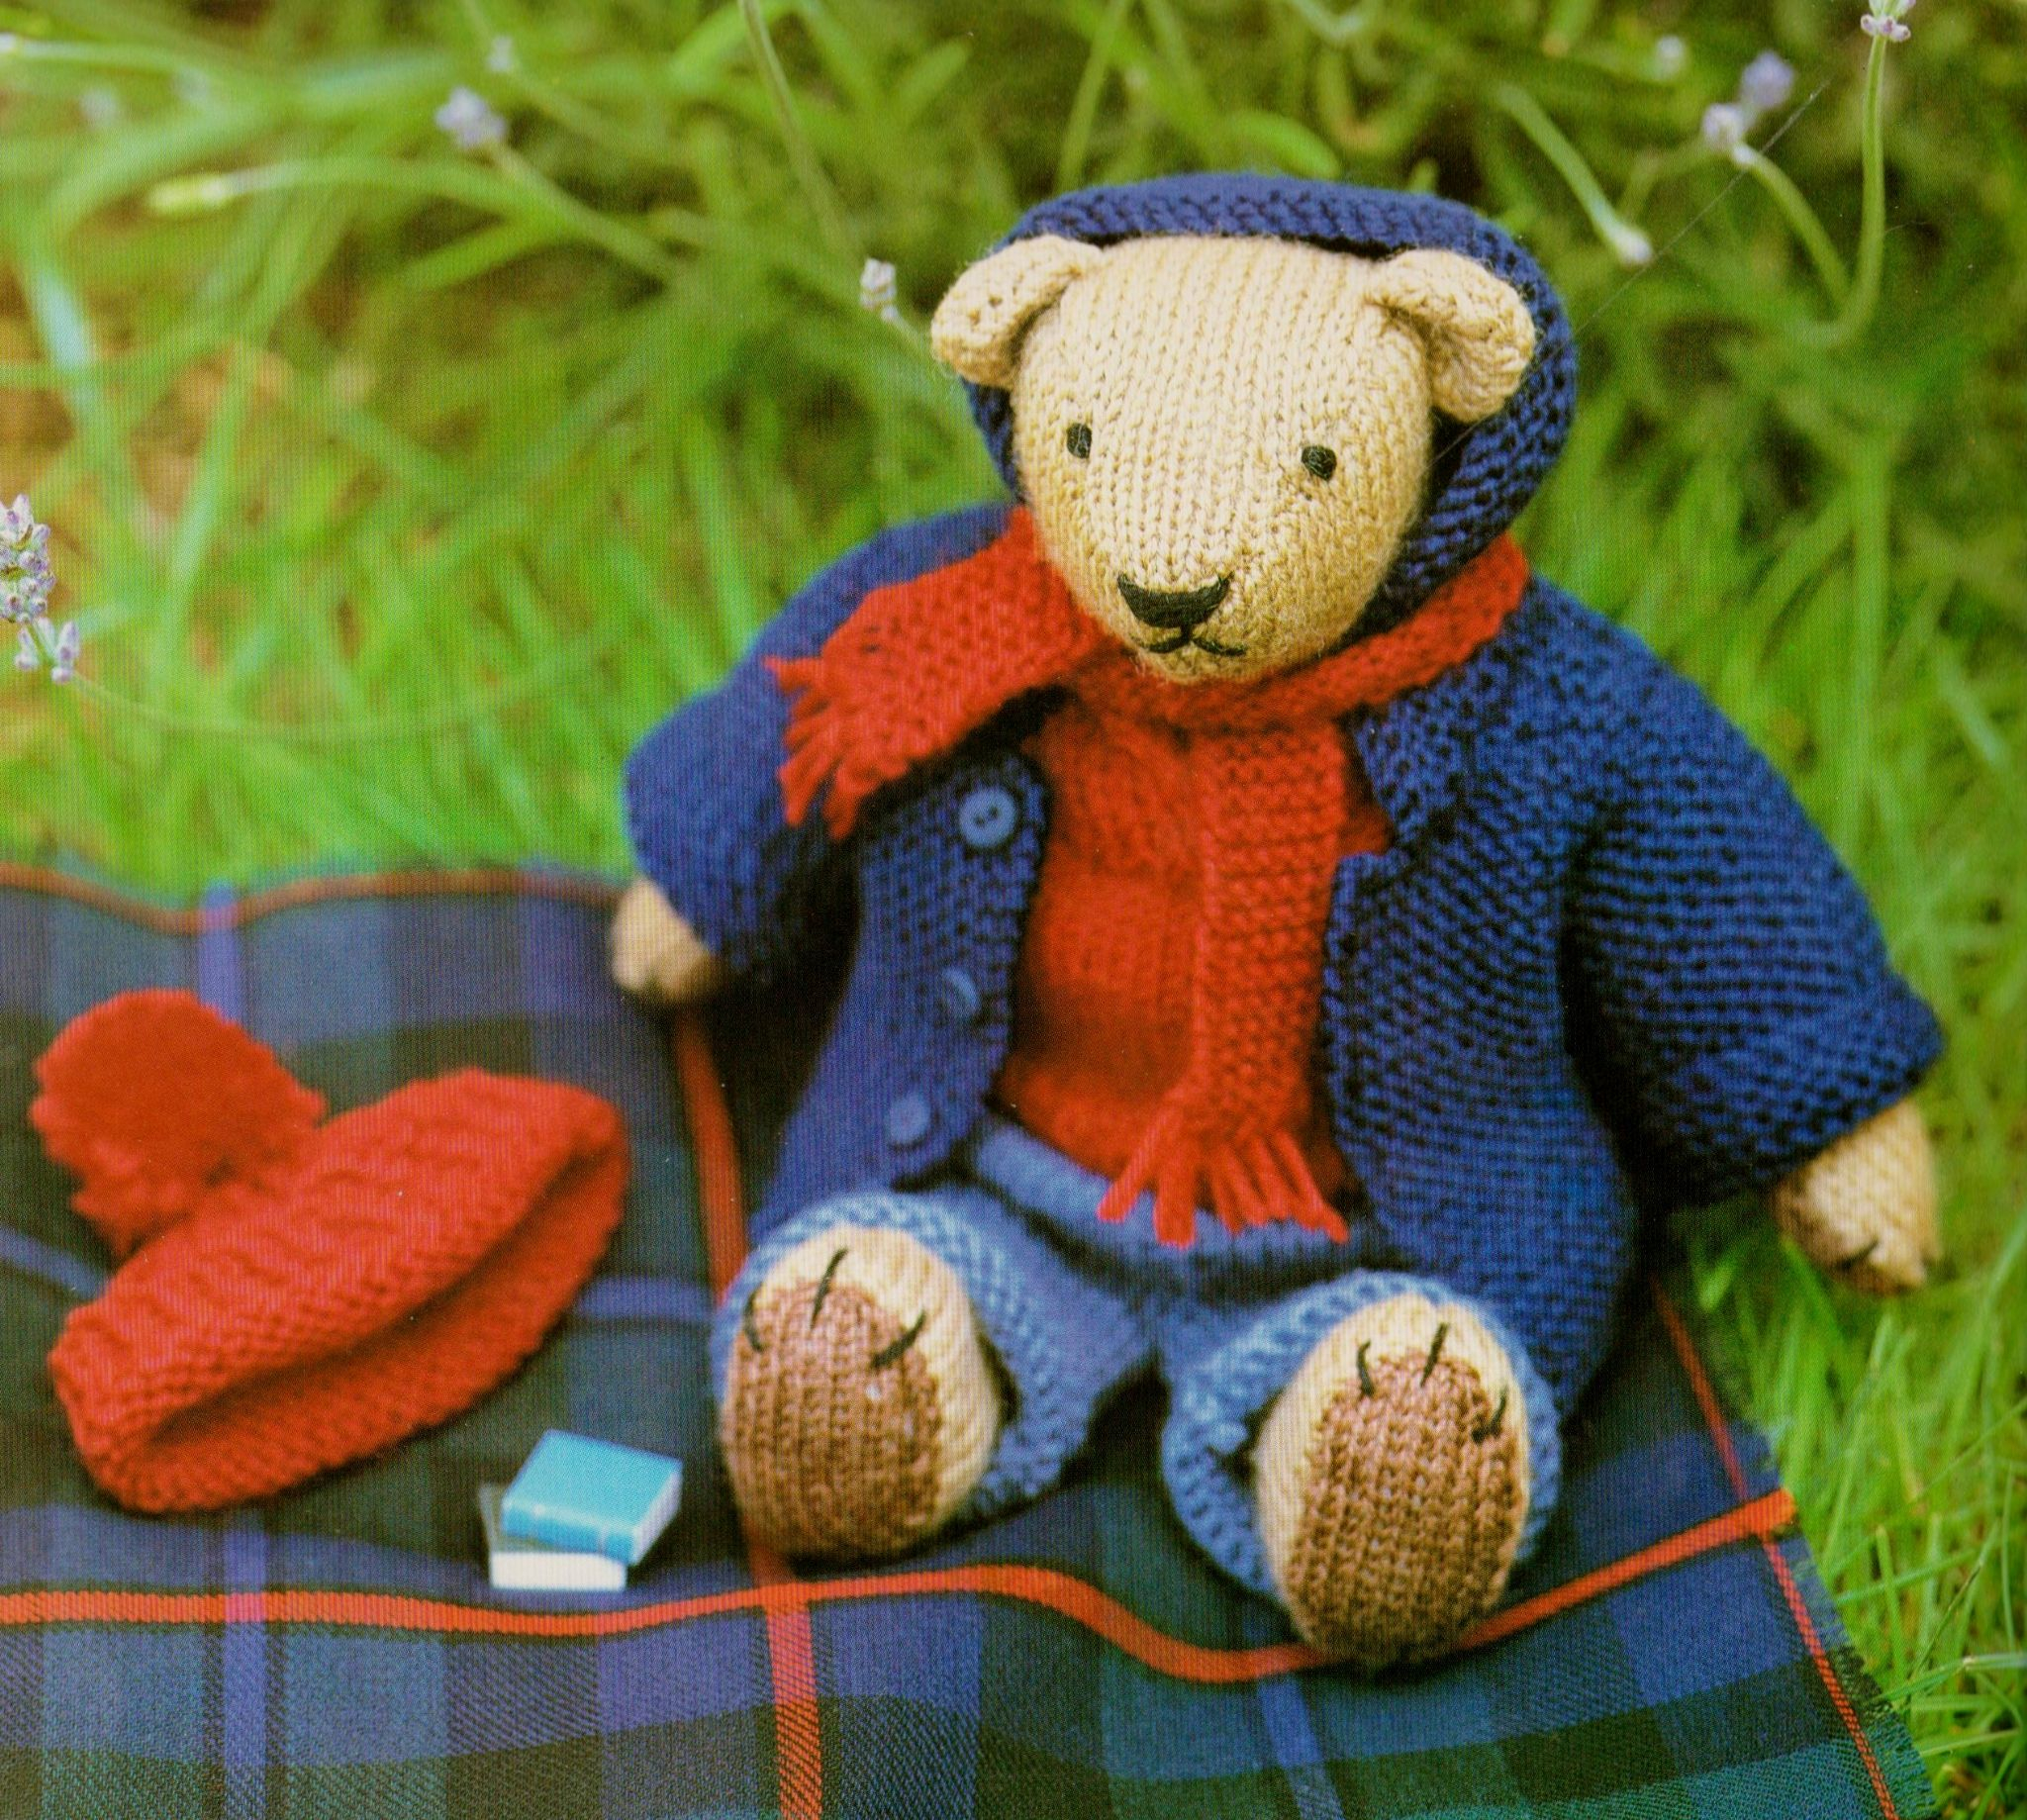 Knitting Patterns For Teddy Bear Clothes Original Vintage Knitting Pattern 10 Teddy Bear With Clothes In 4 Ply Yarn